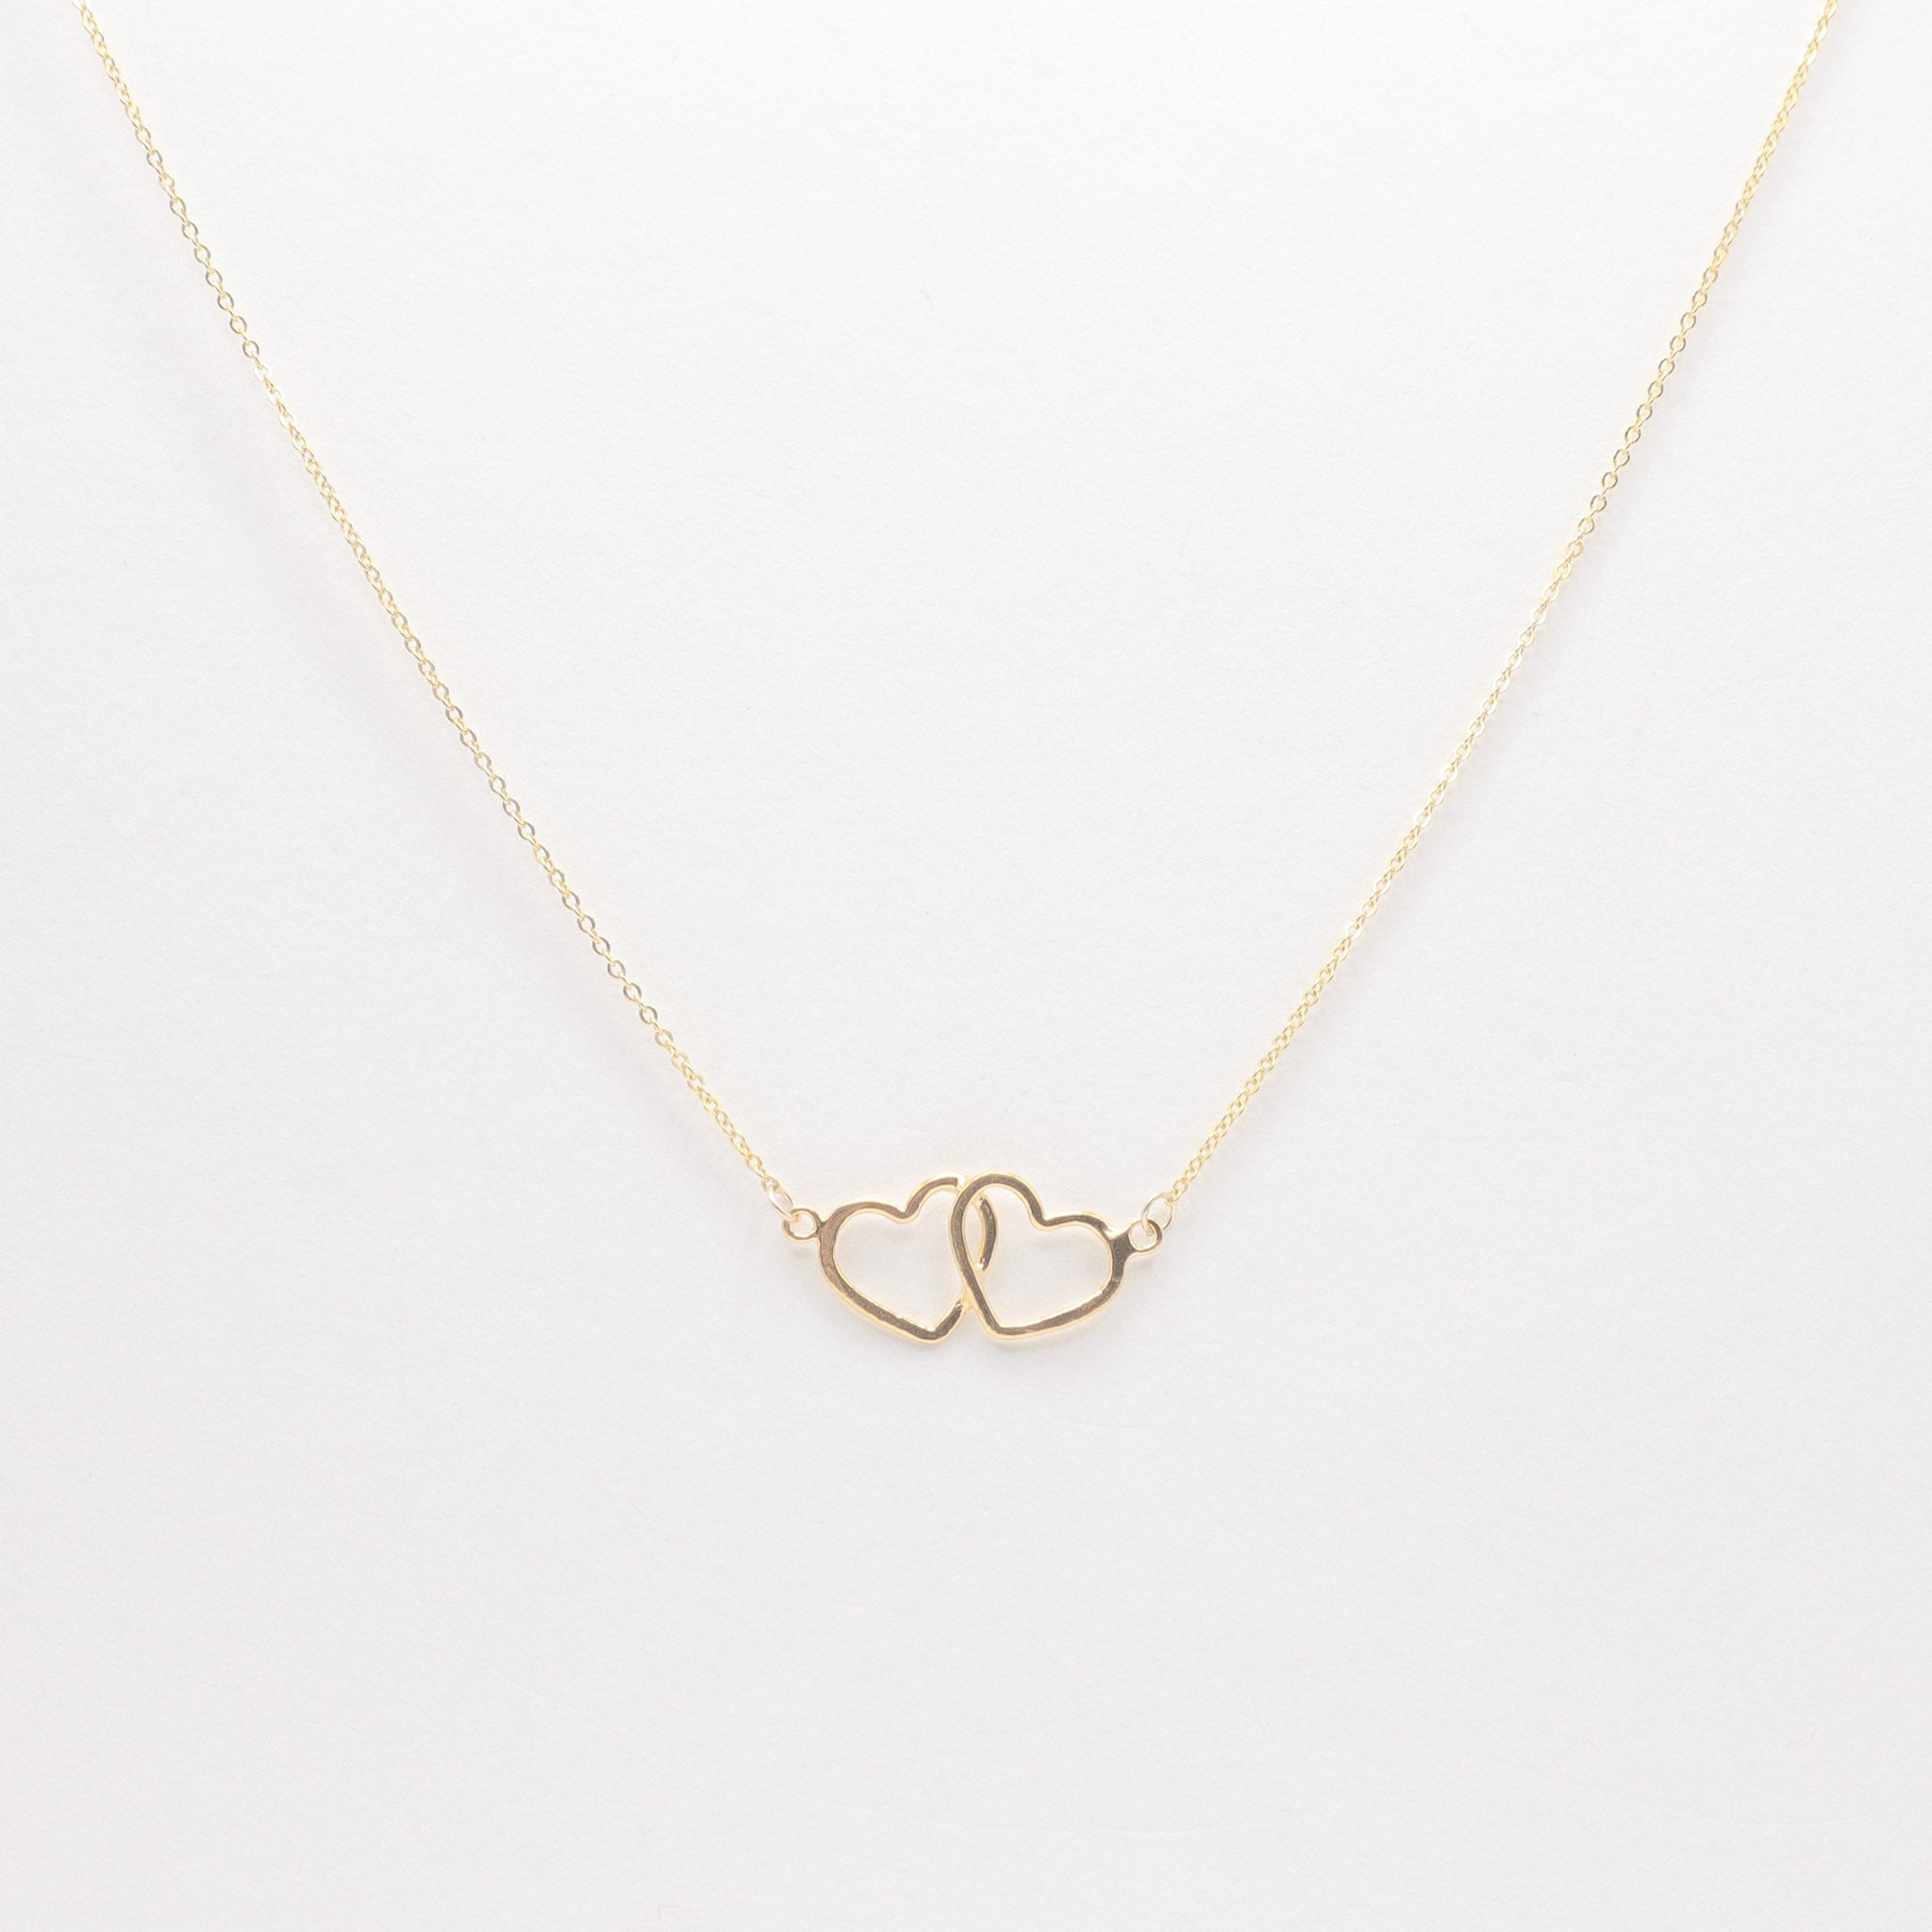 Gold Friendship Necklace, featured image